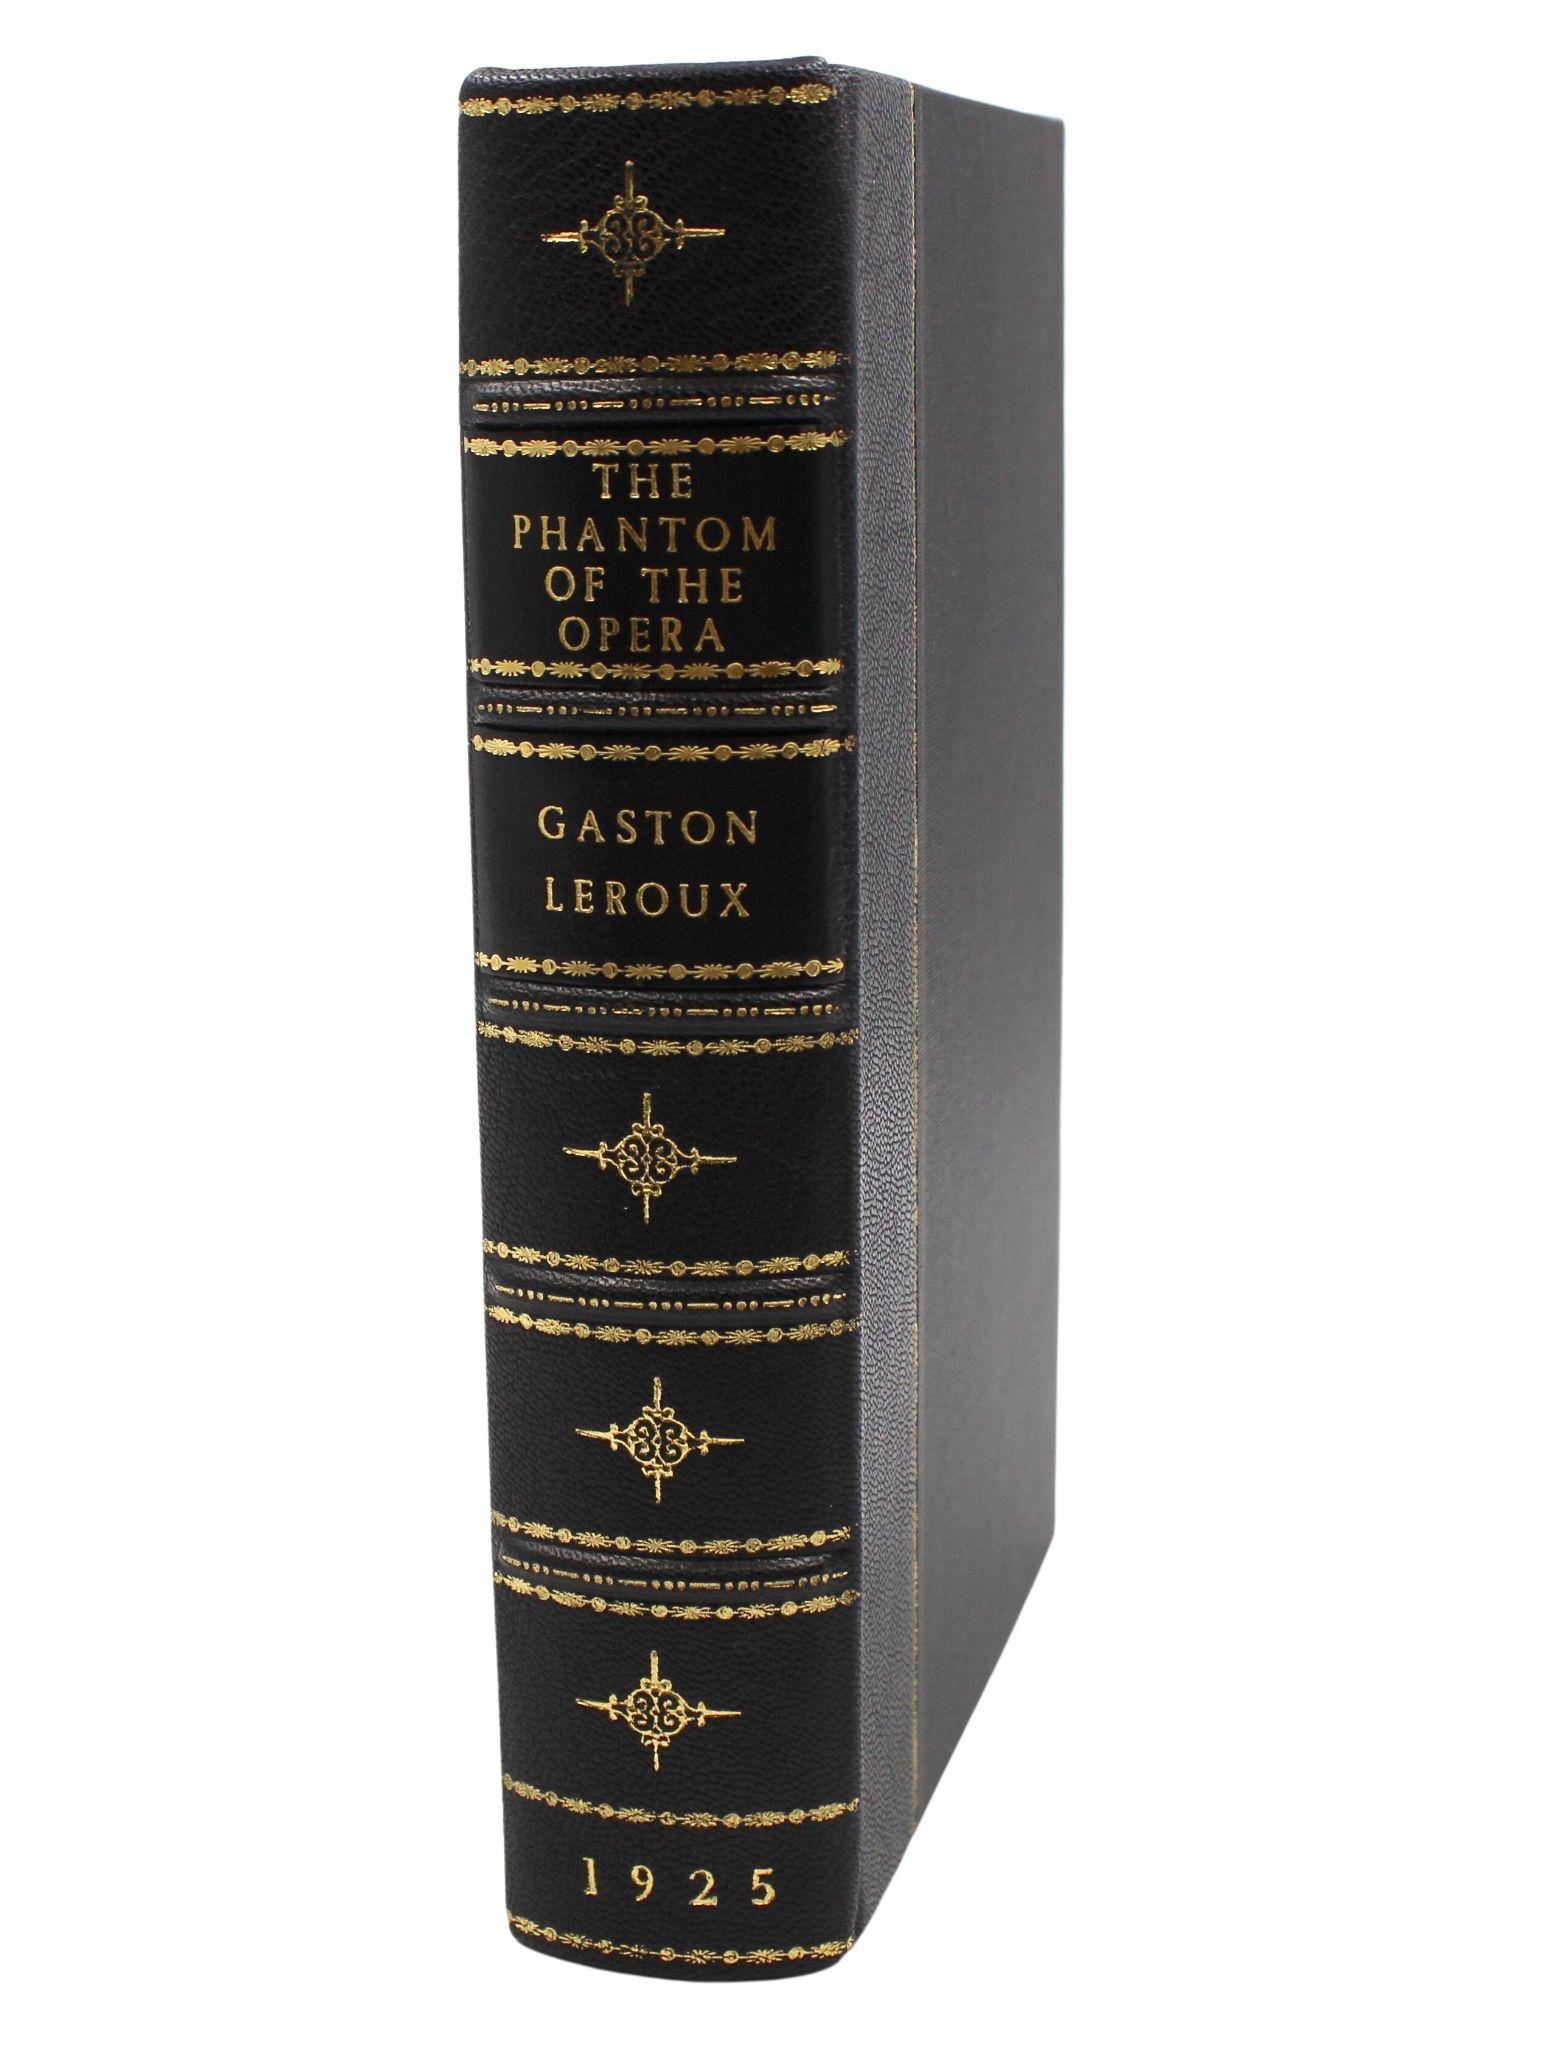 Gilt The Phantom of the Opera by Gaston Leroux, Signed by Carla Laemmle, Photoplay For Sale